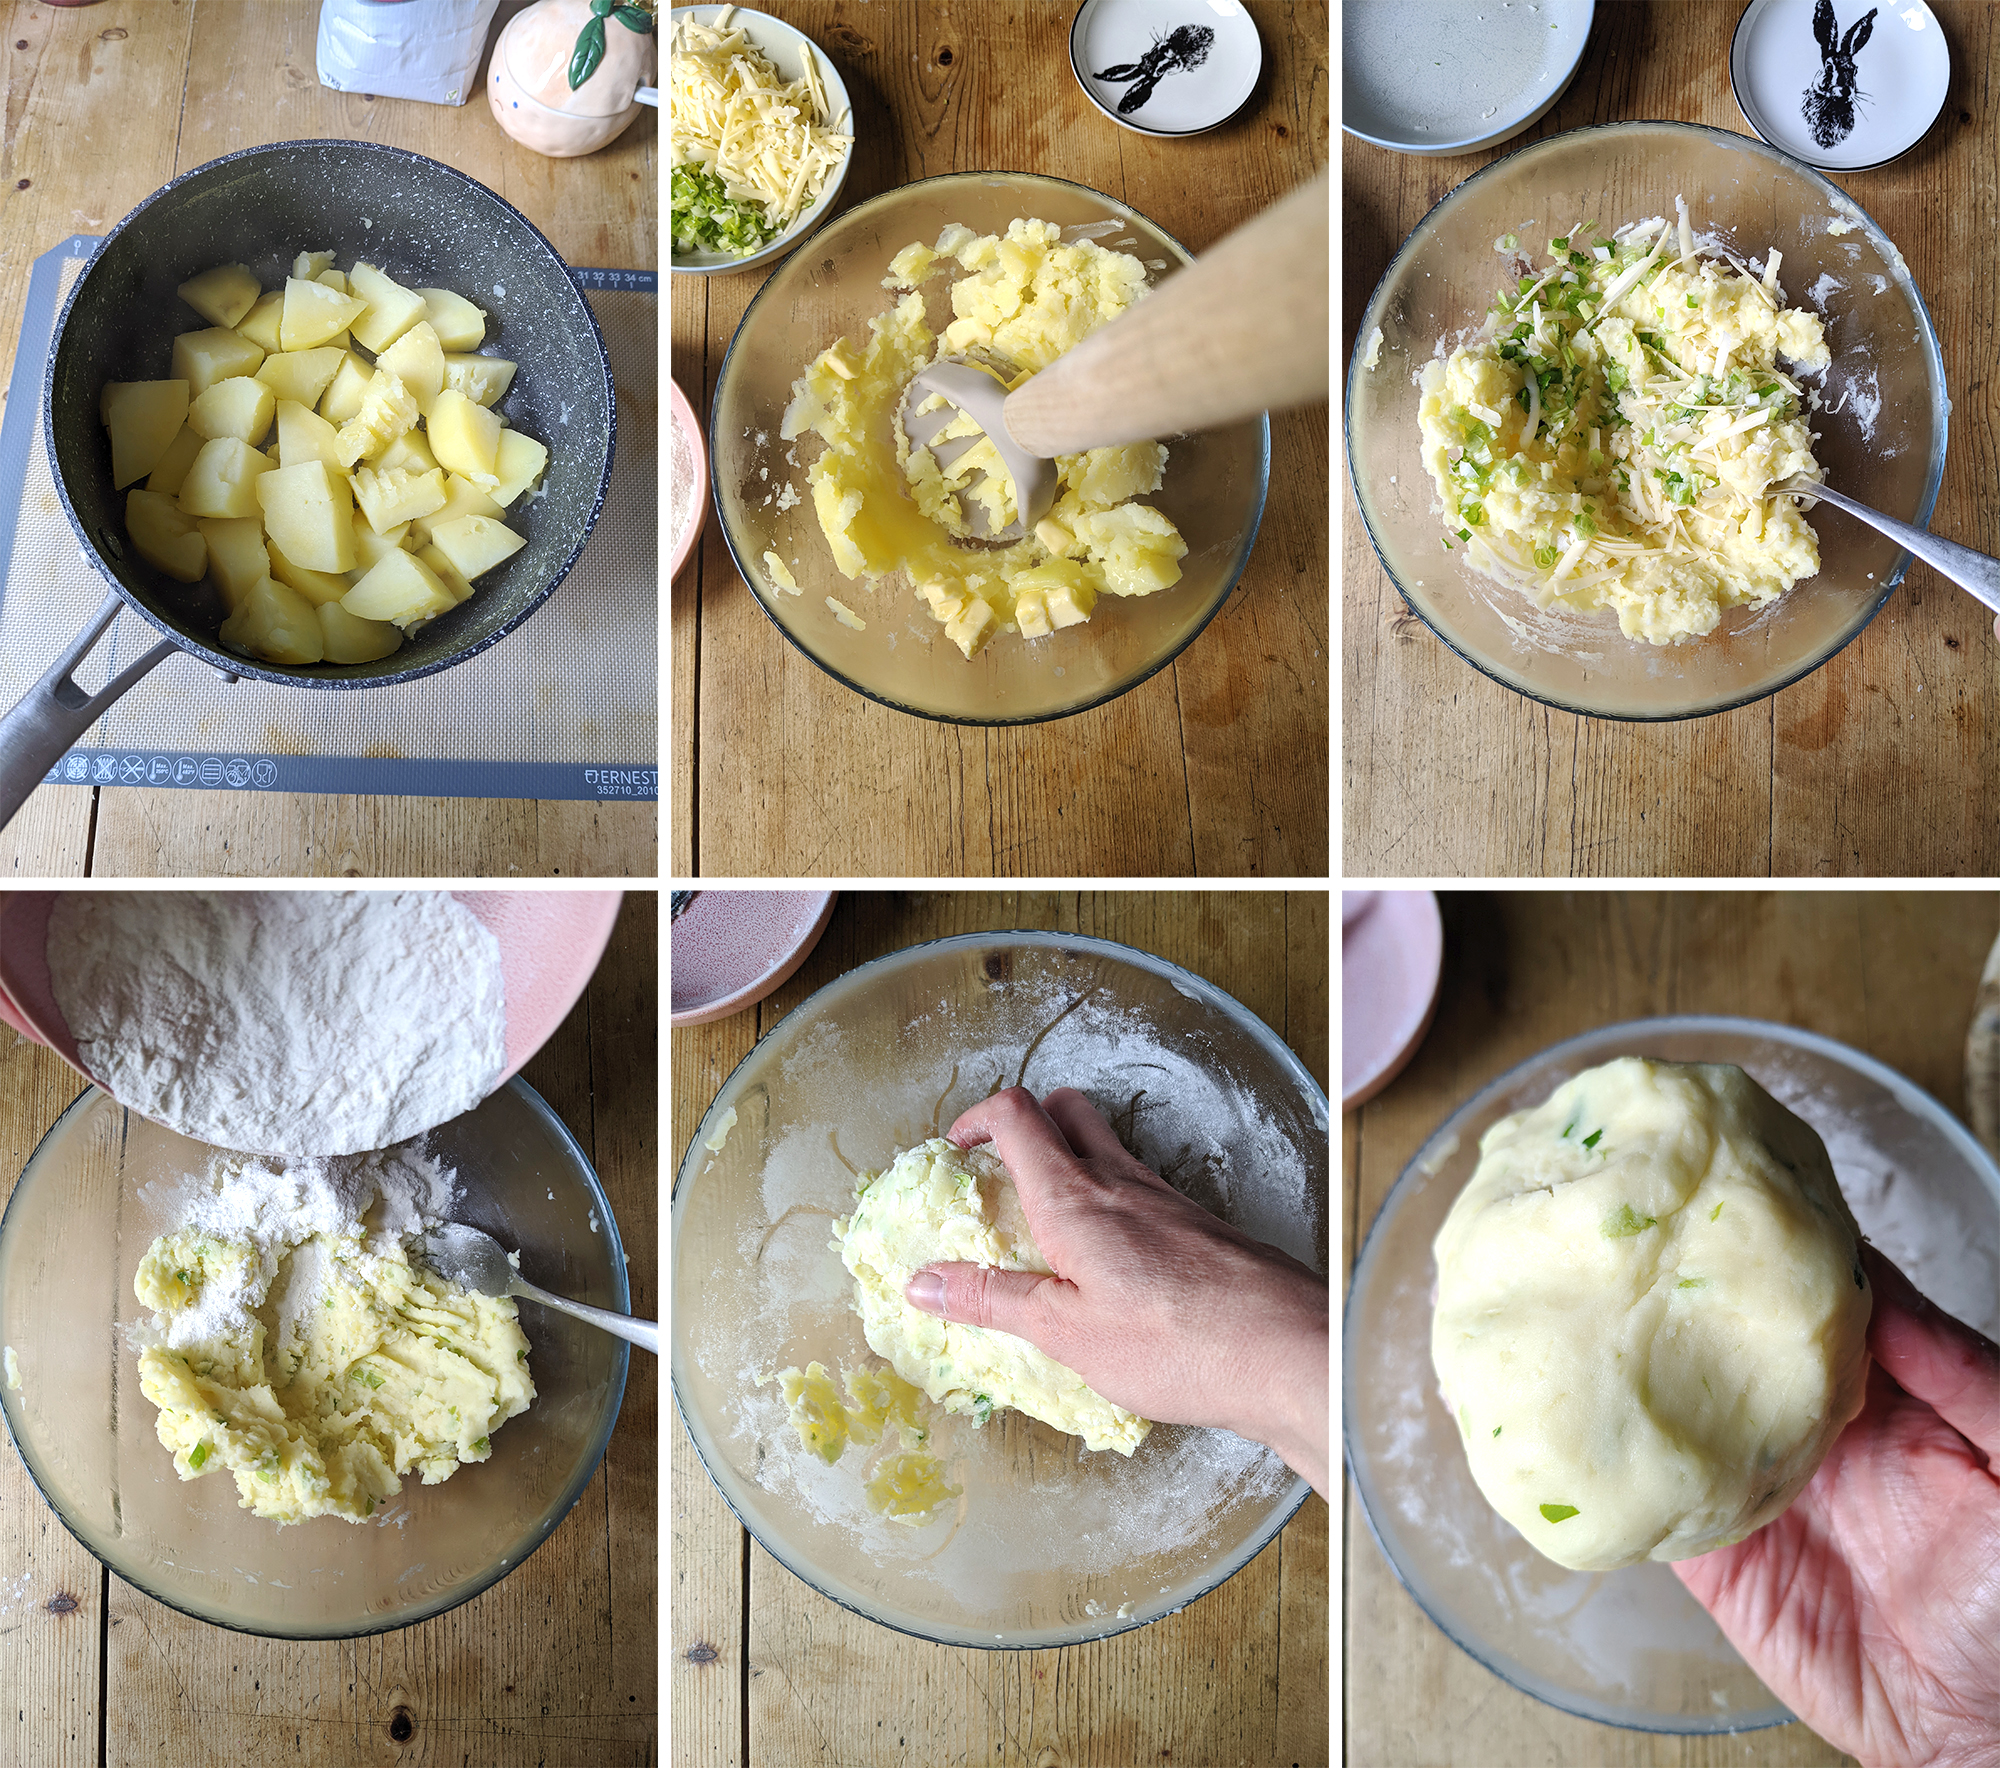 Step by step process of making potato scones